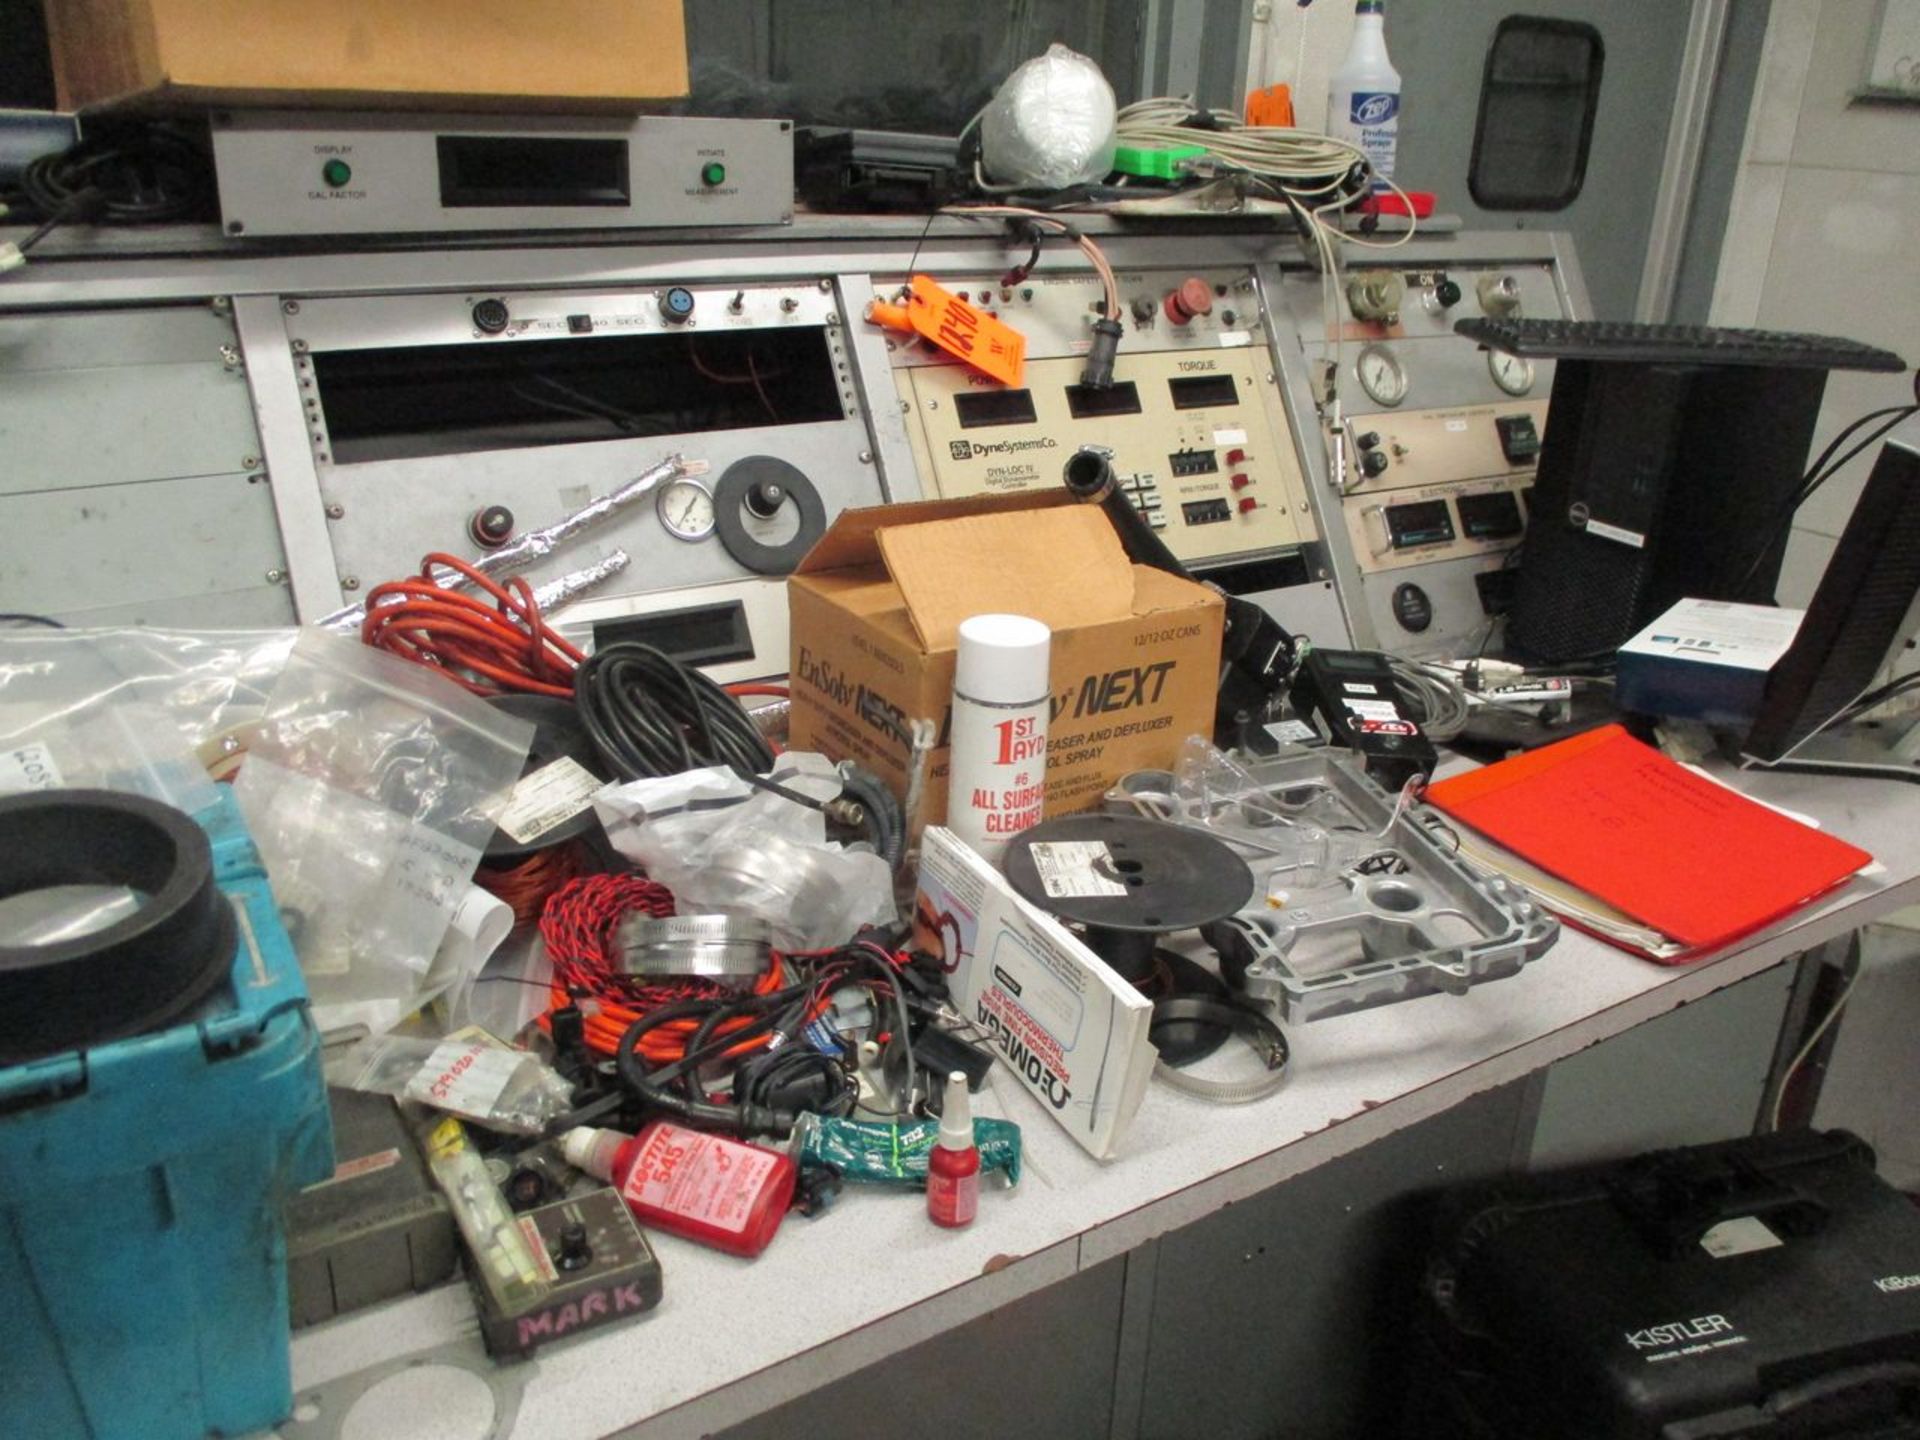 Contents of Cell 7 including (2) Manual Chain Hoists, Fuel Pump, Exhaust System, Piping, Valves, - Image 4 of 4